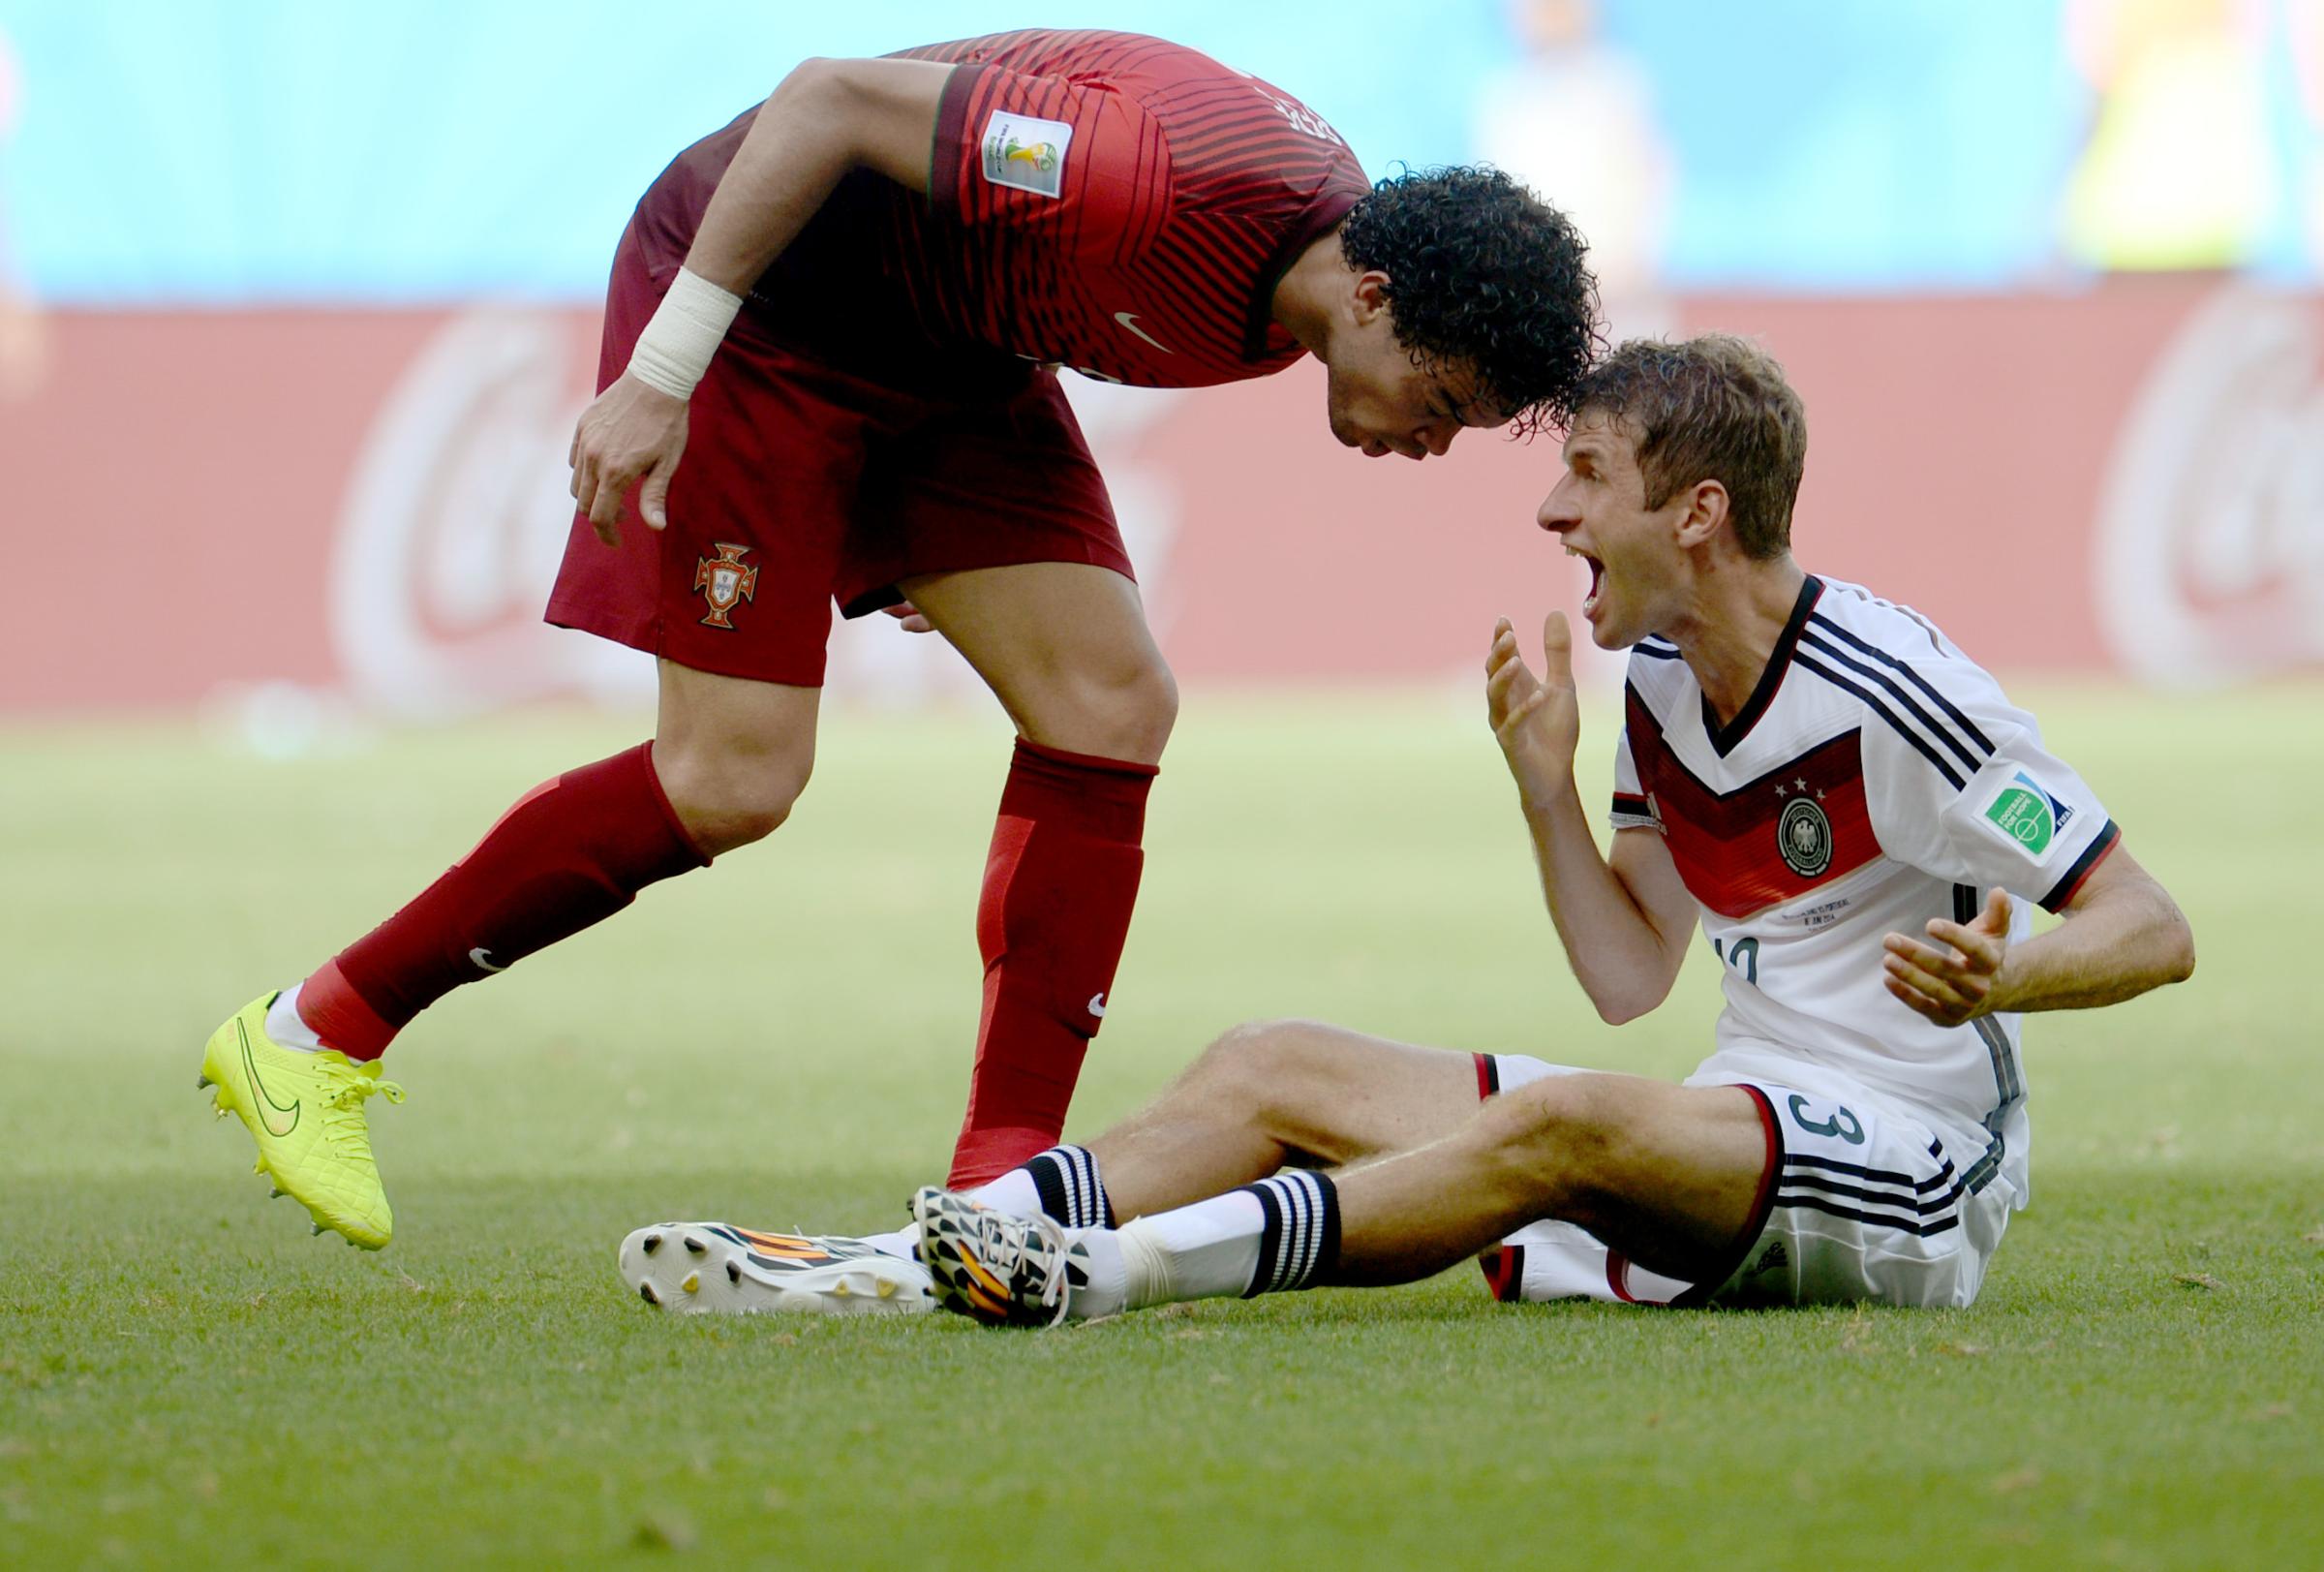 Pepe of Portugal argues with Thomas Müller of Germany and gives him a headbutt during to the FIFA World Cup 2014 group G preliminary round match between Germany and Portugal at the Arena Fonte Nova Stadium in Salvador da Bahia, Brazil on June 16, 2014.